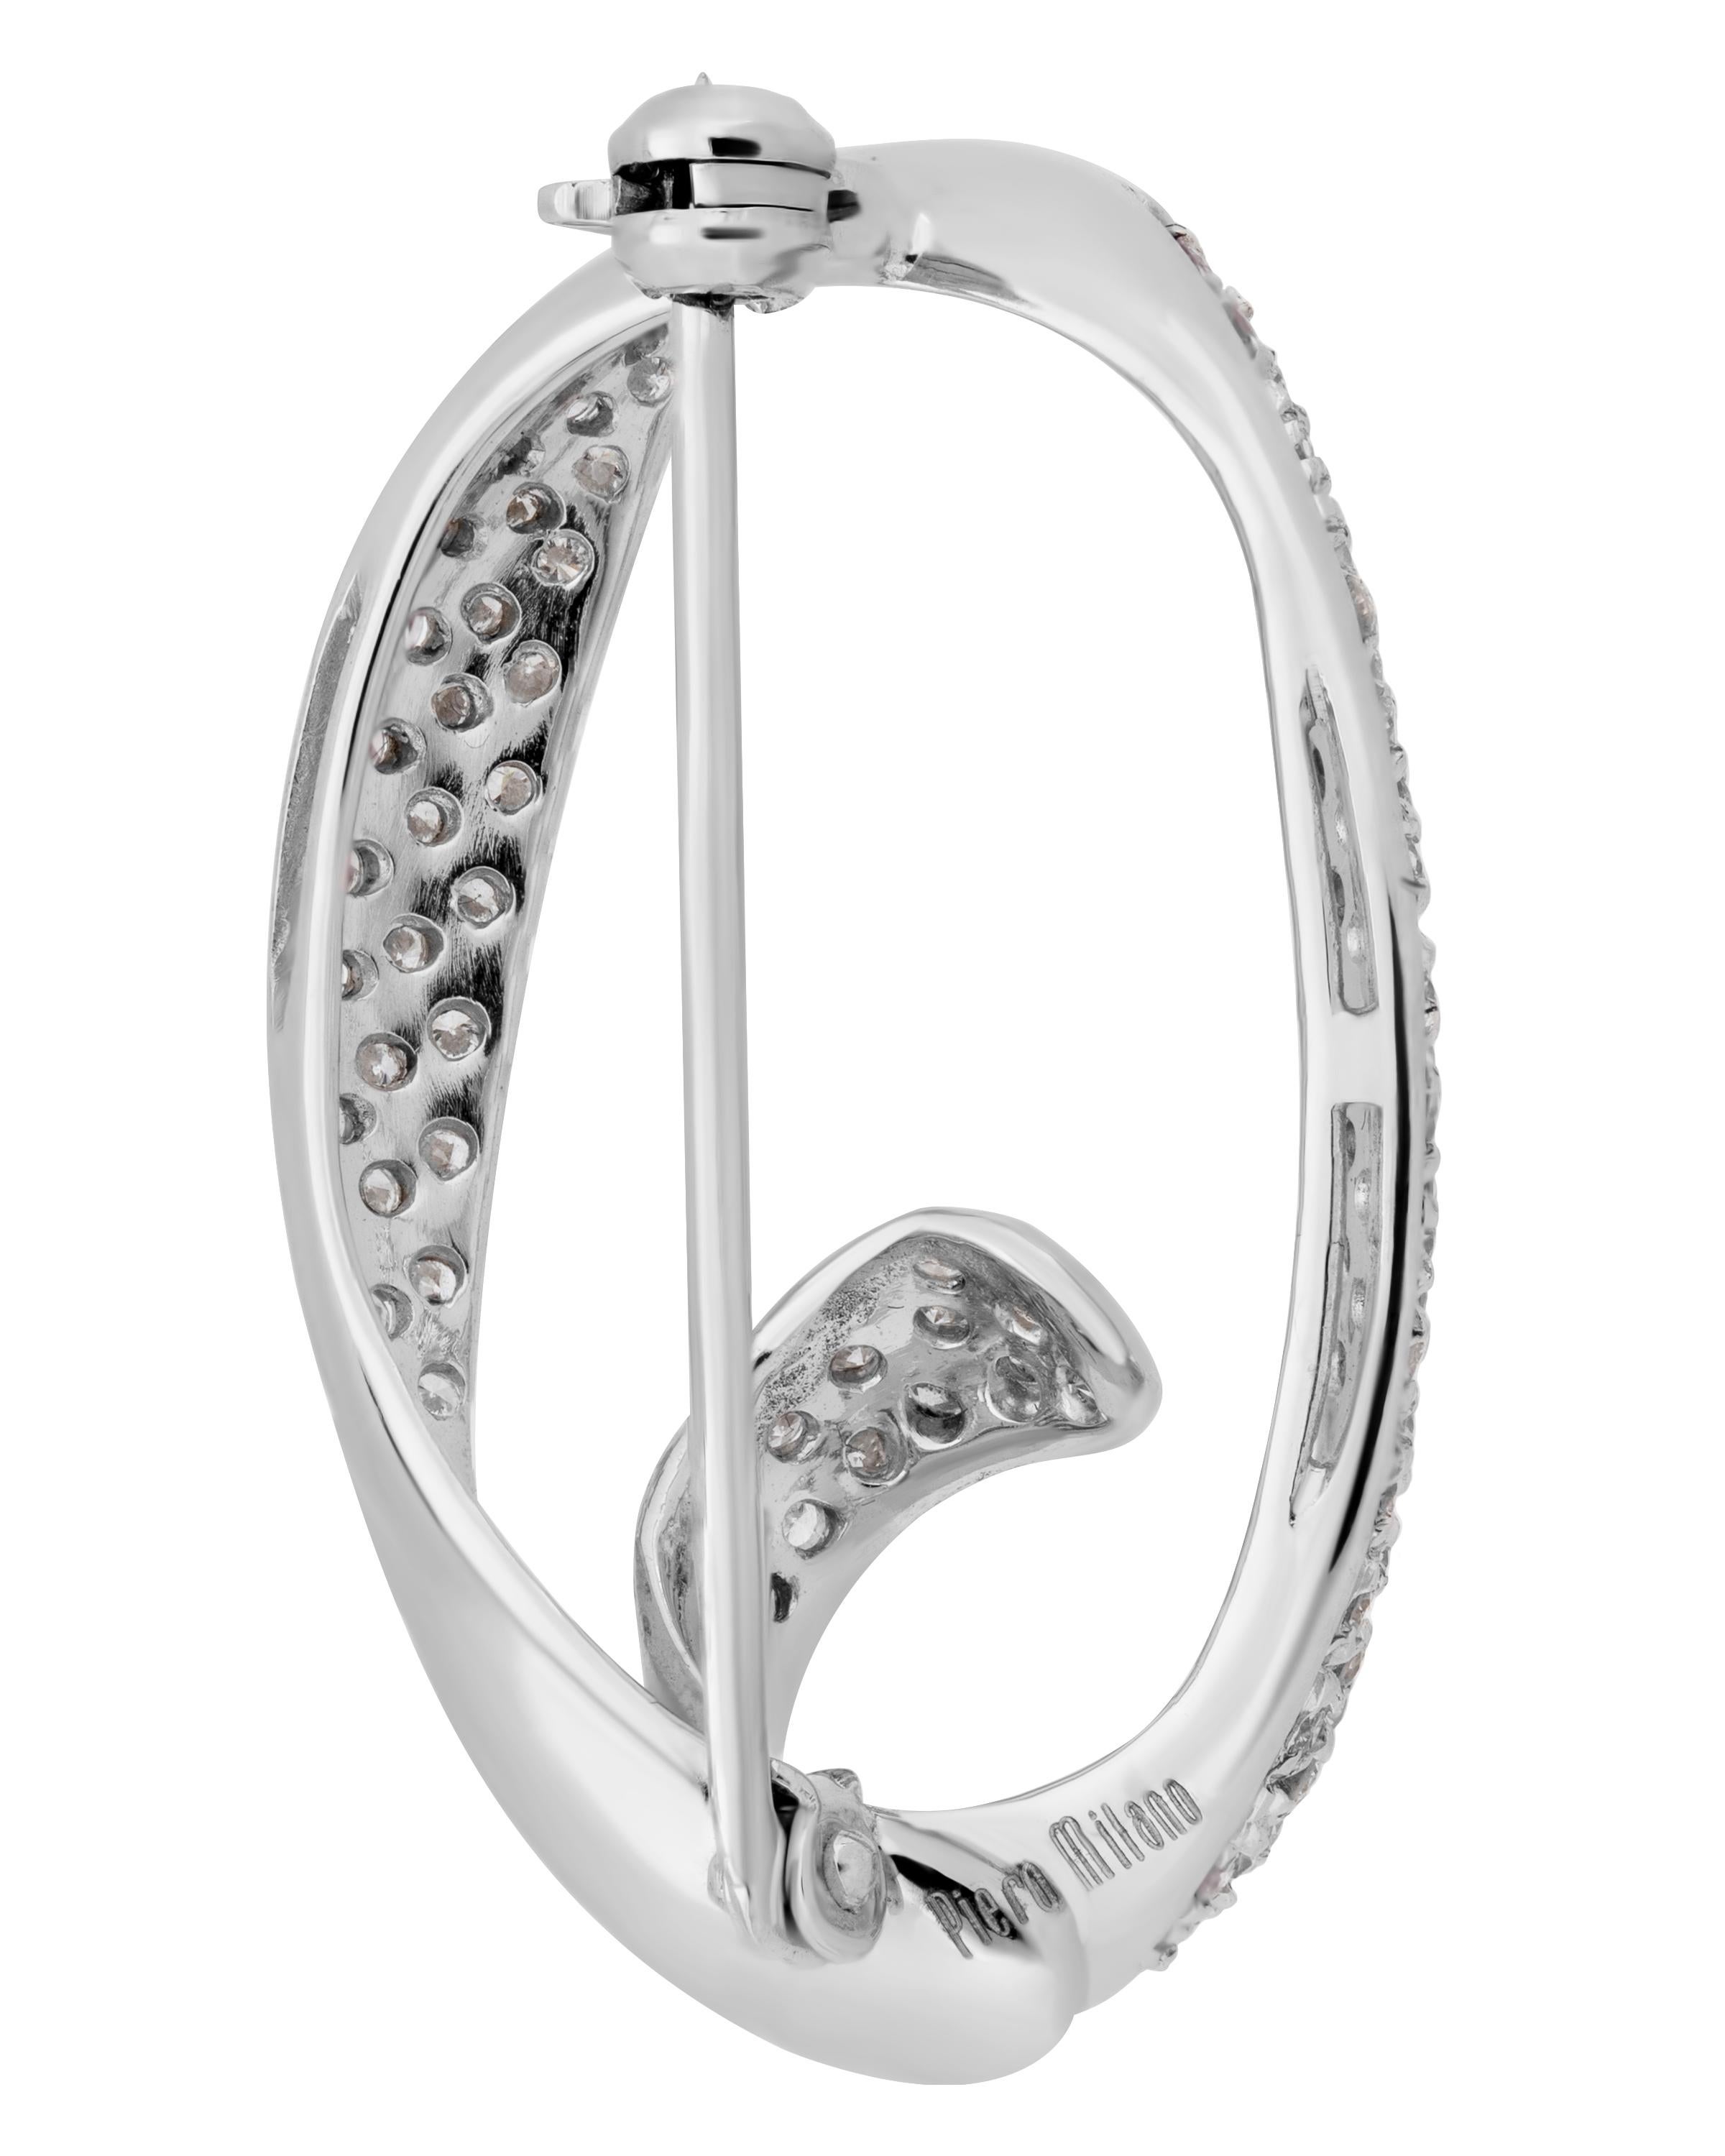 This distinctive Piero Milano 18K White Gold Letter Brooch features a swirling letter 